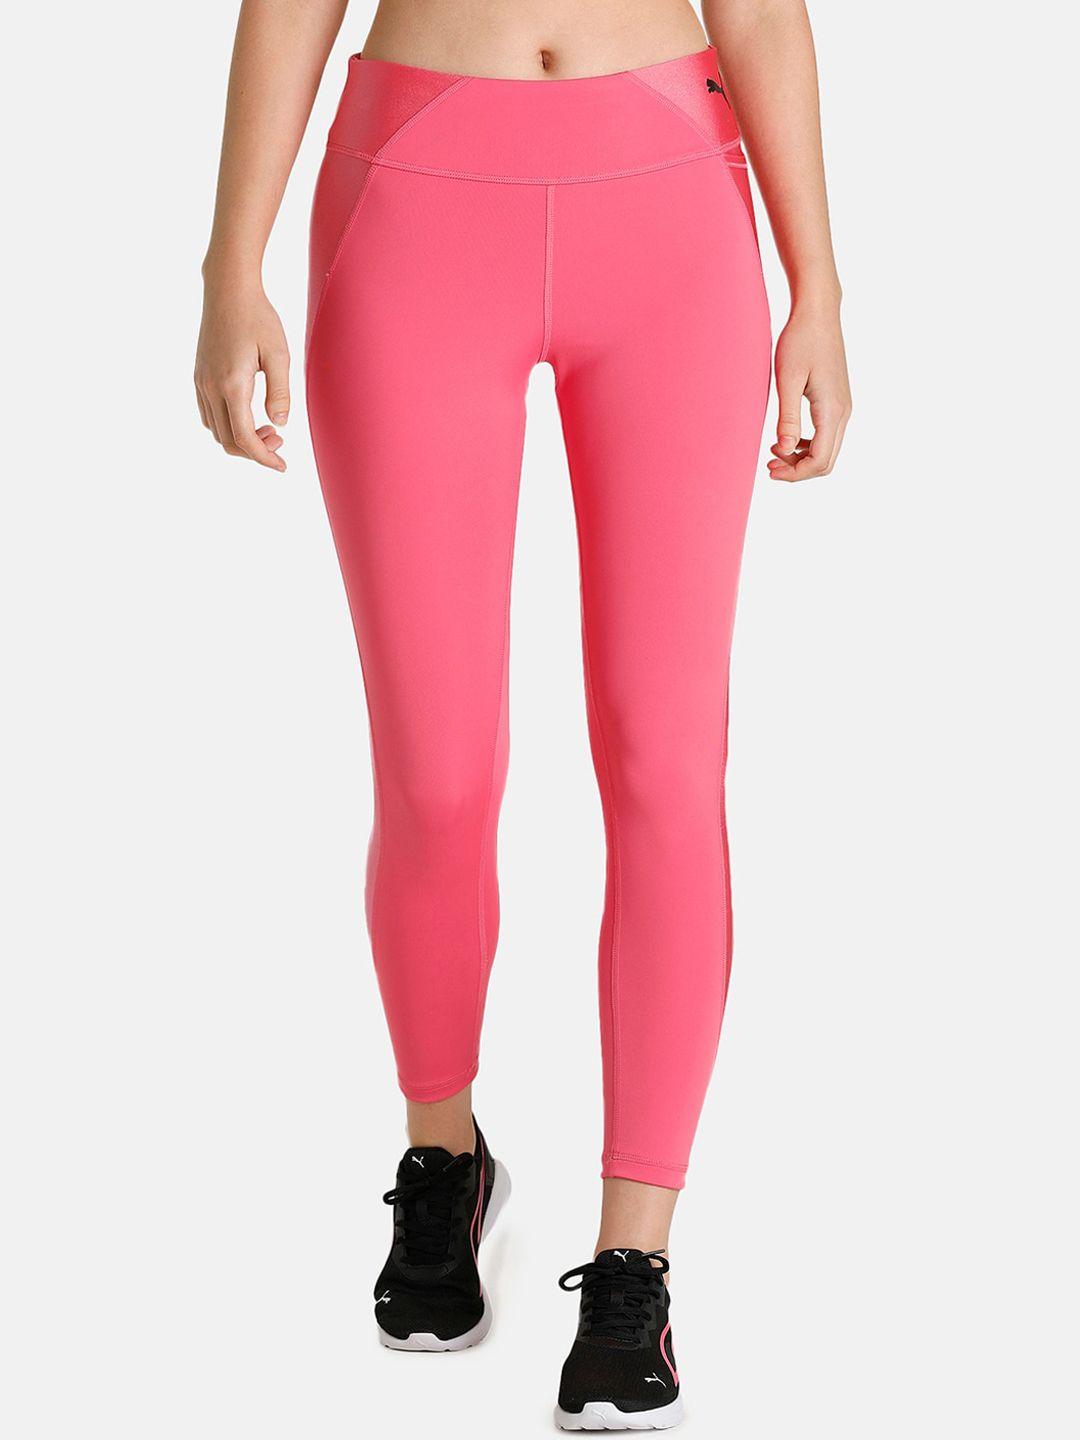 puma-women-pink-solid-day-in-motion-tights